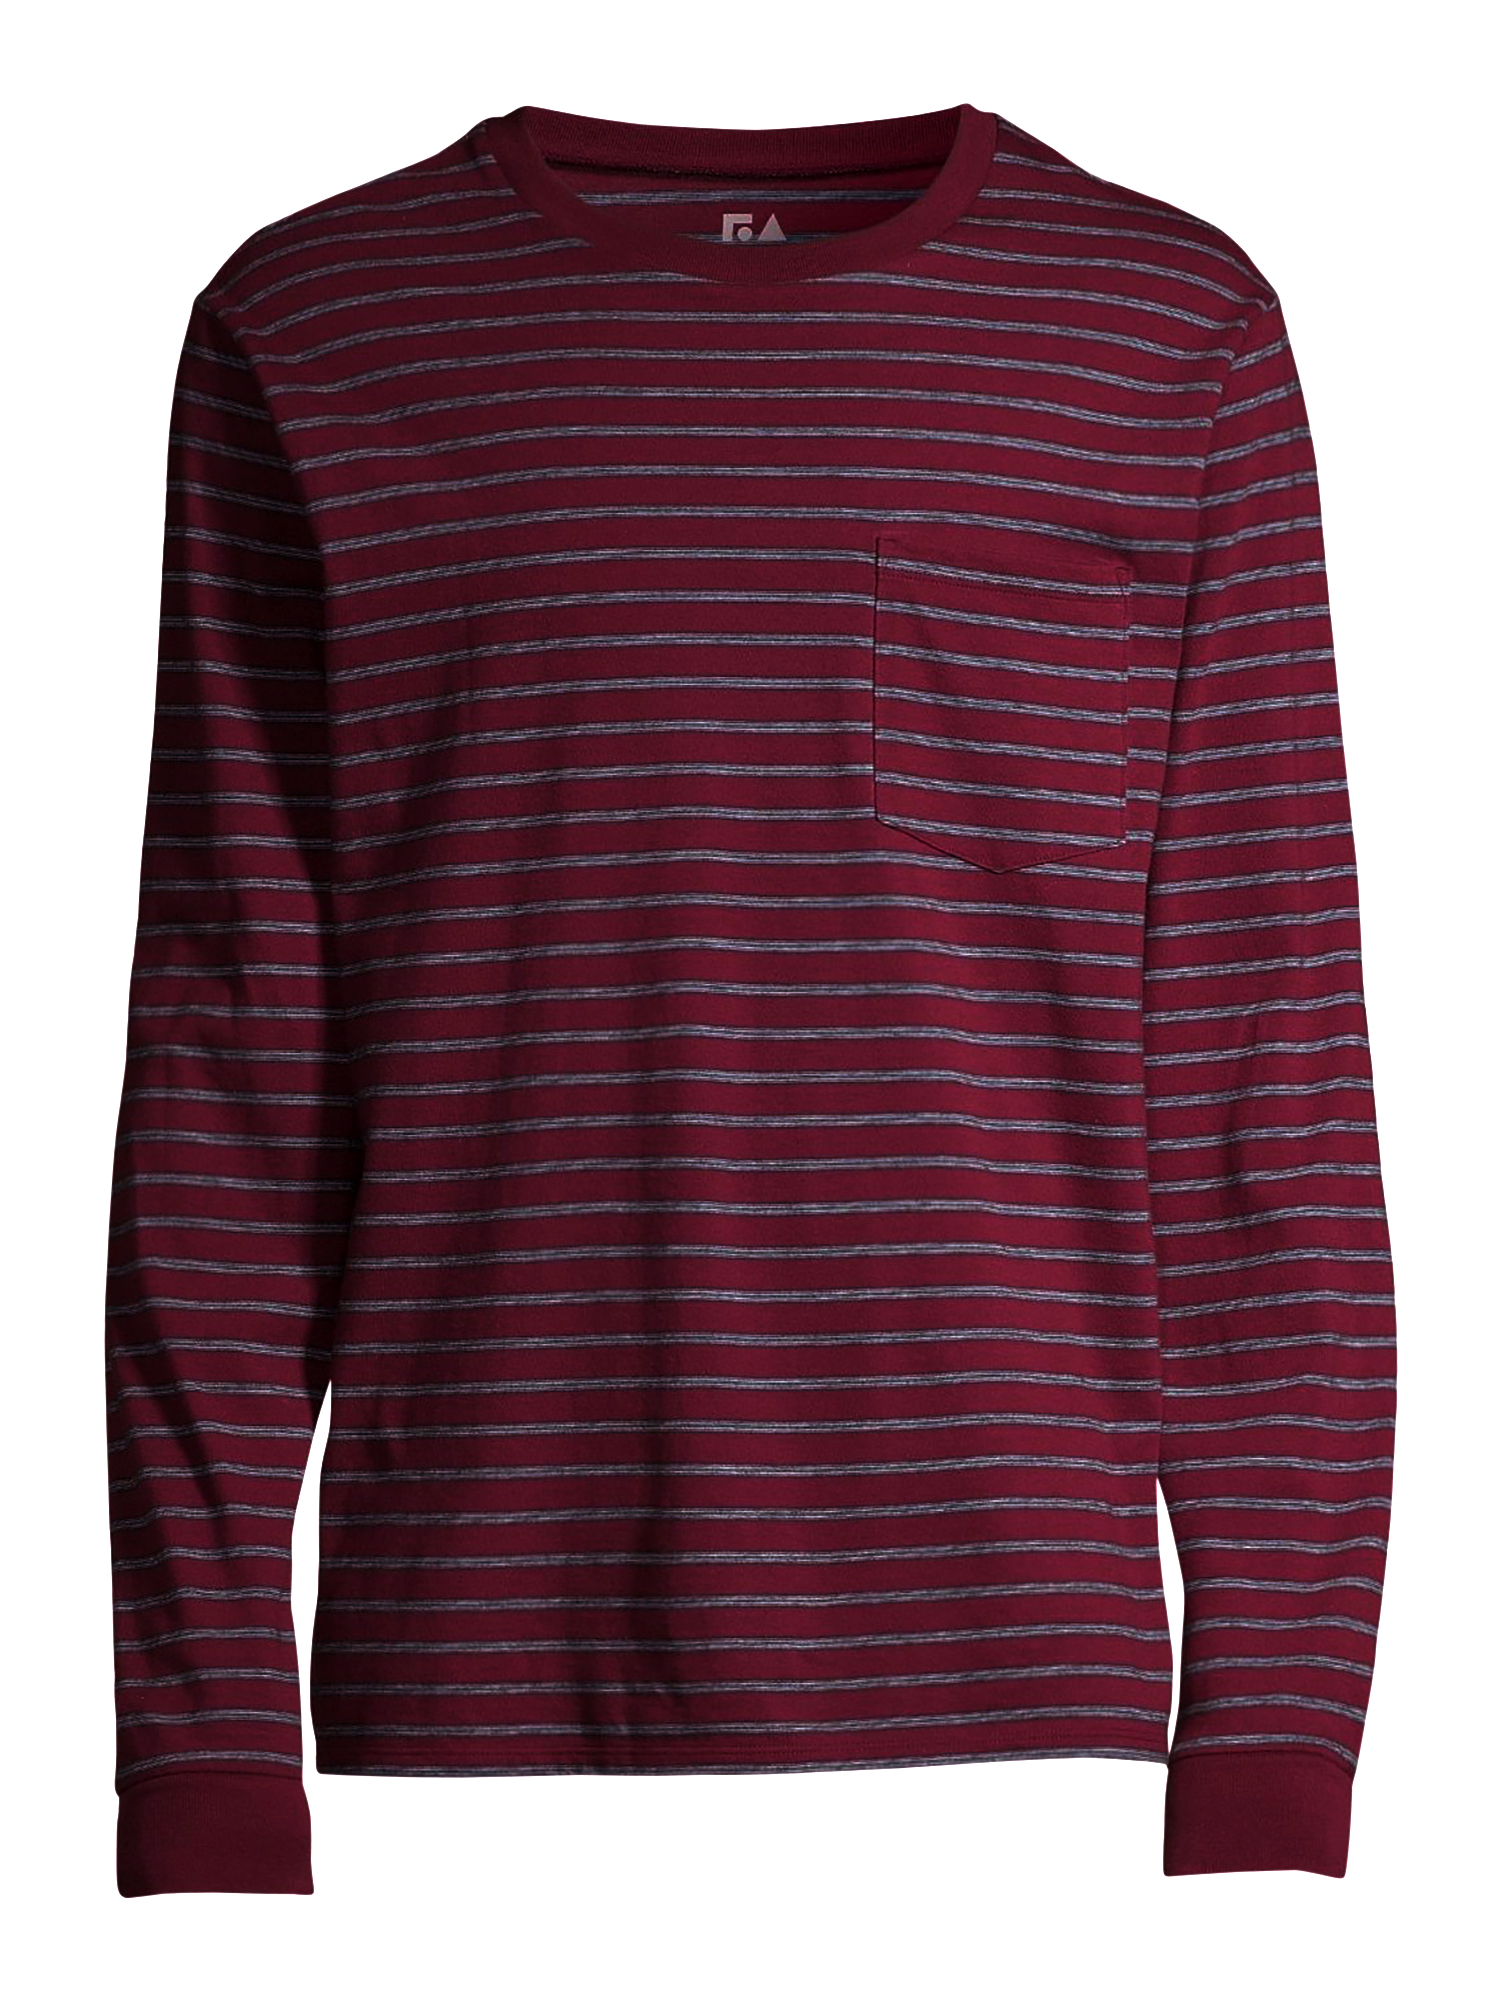 Free Assembly Men's Everyday Long Sleeve Pocket Tee - image 3 of 6